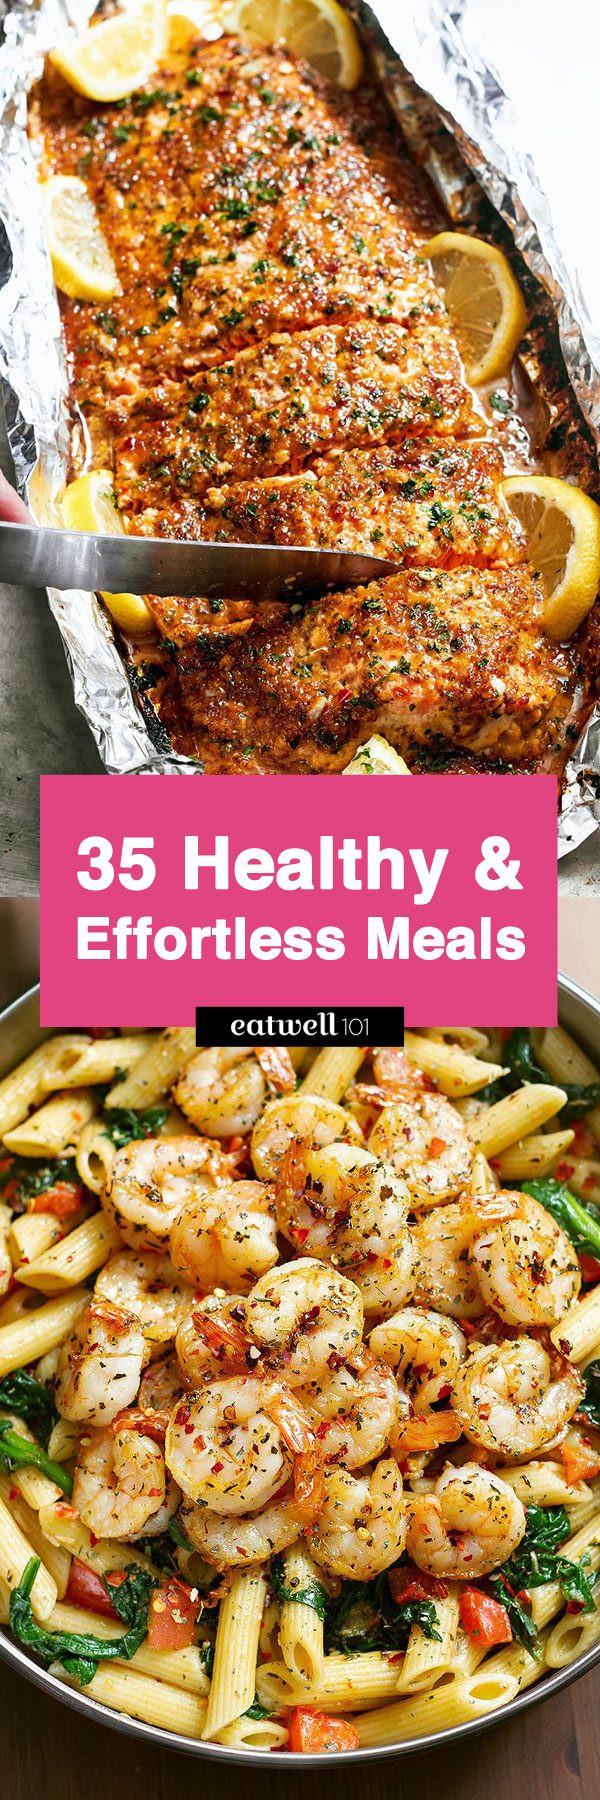 Simple Healthy Dinner
 43 Low Effort and Healthy Dinner Recipes — Eatwell101